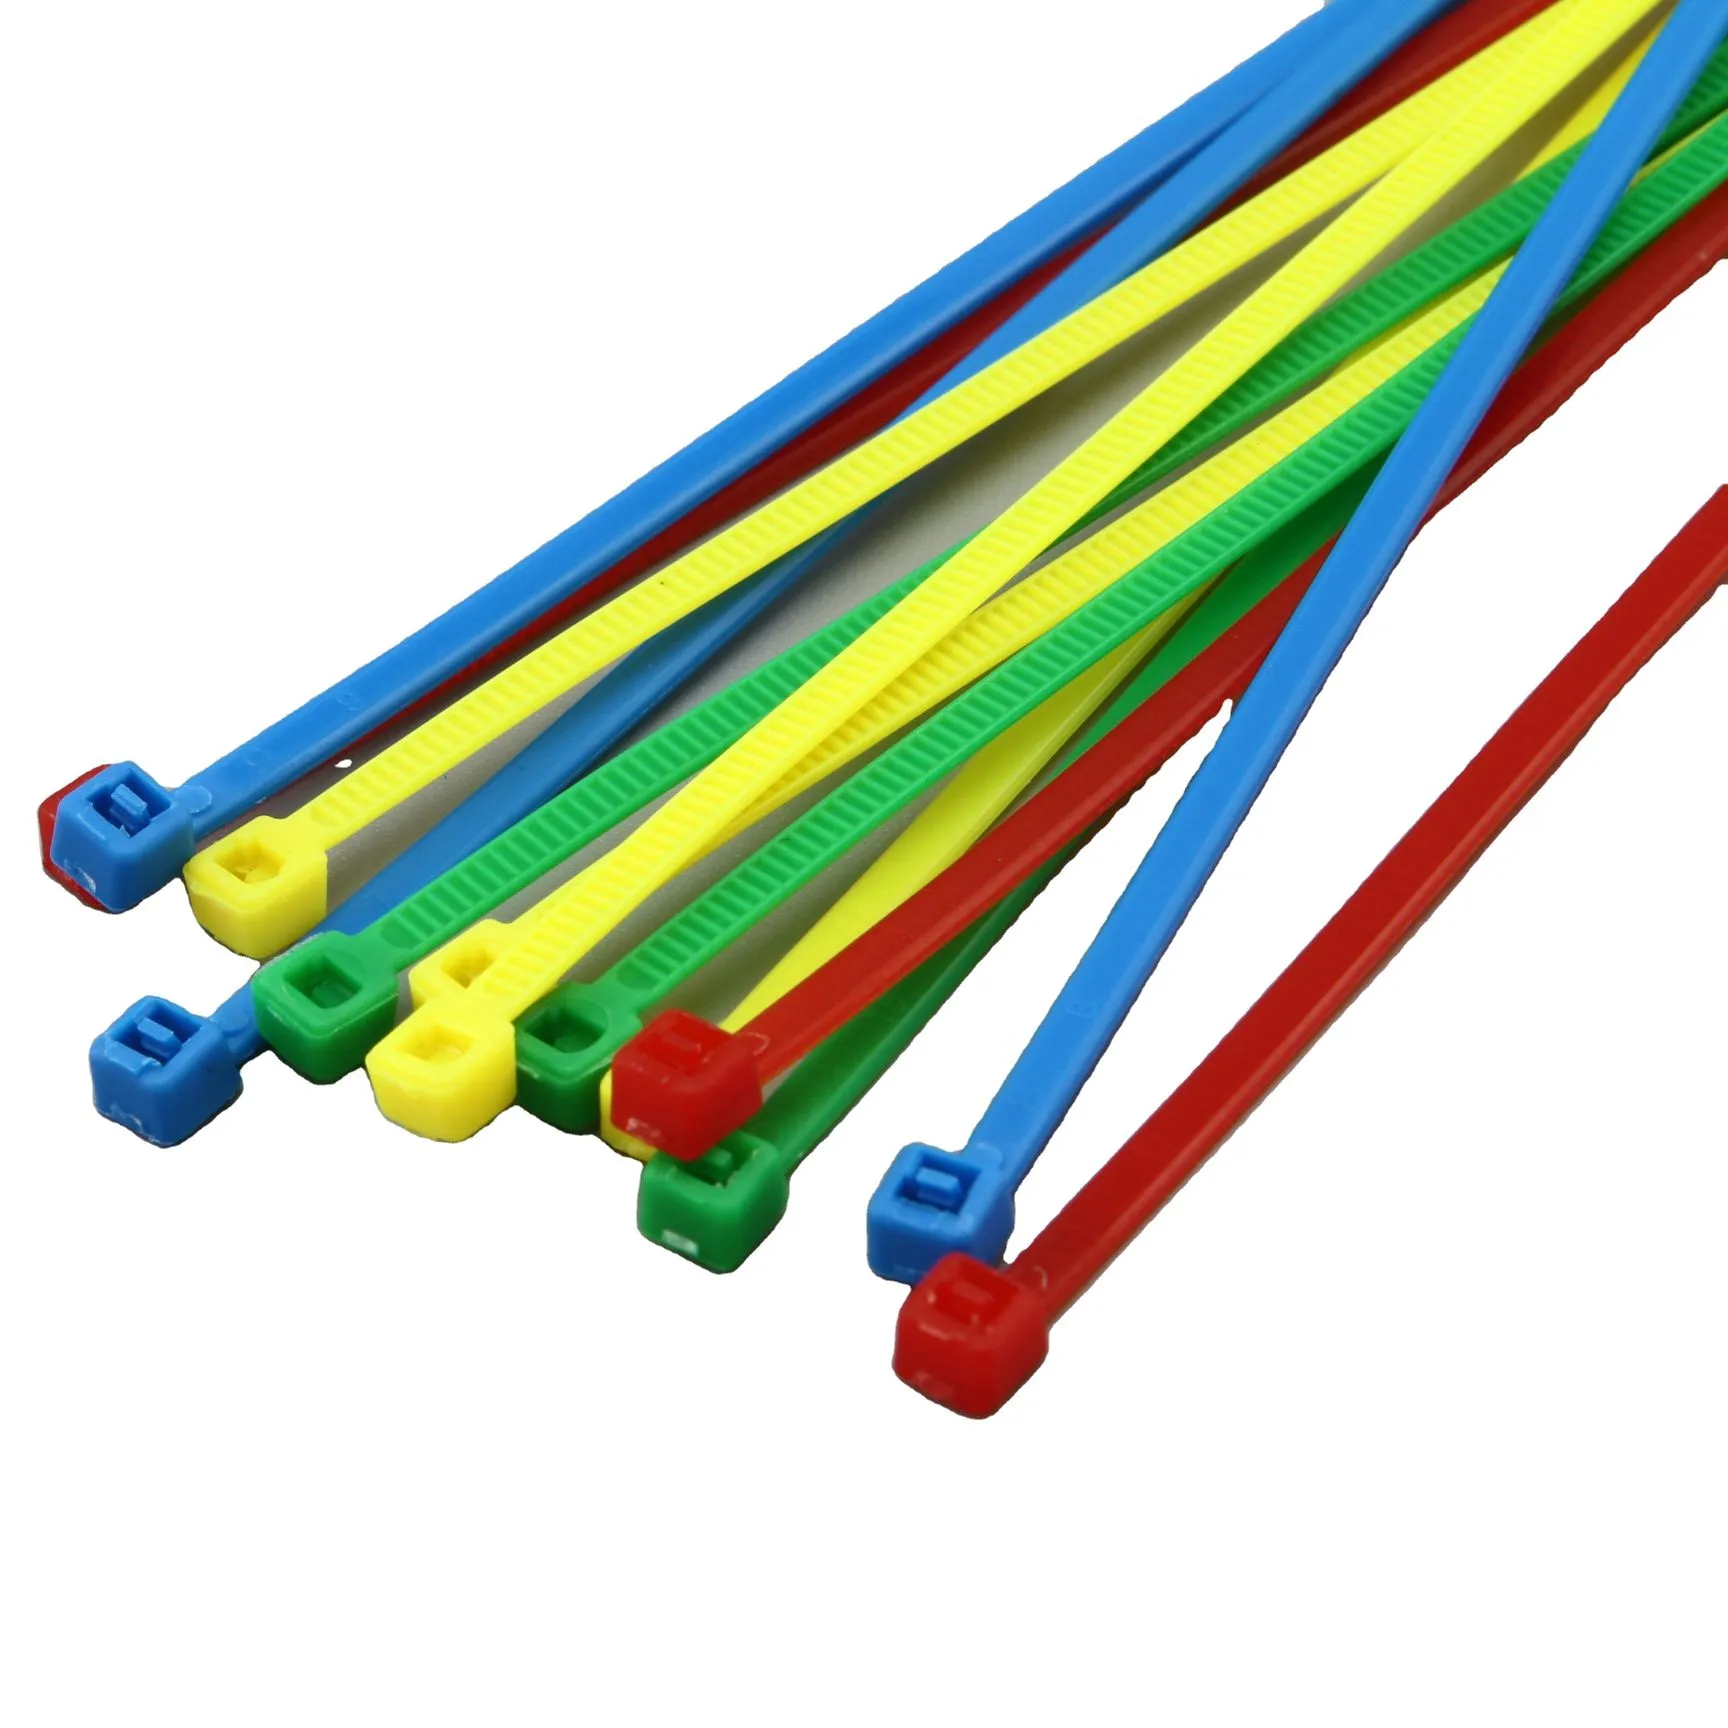 Fishbone cable tie